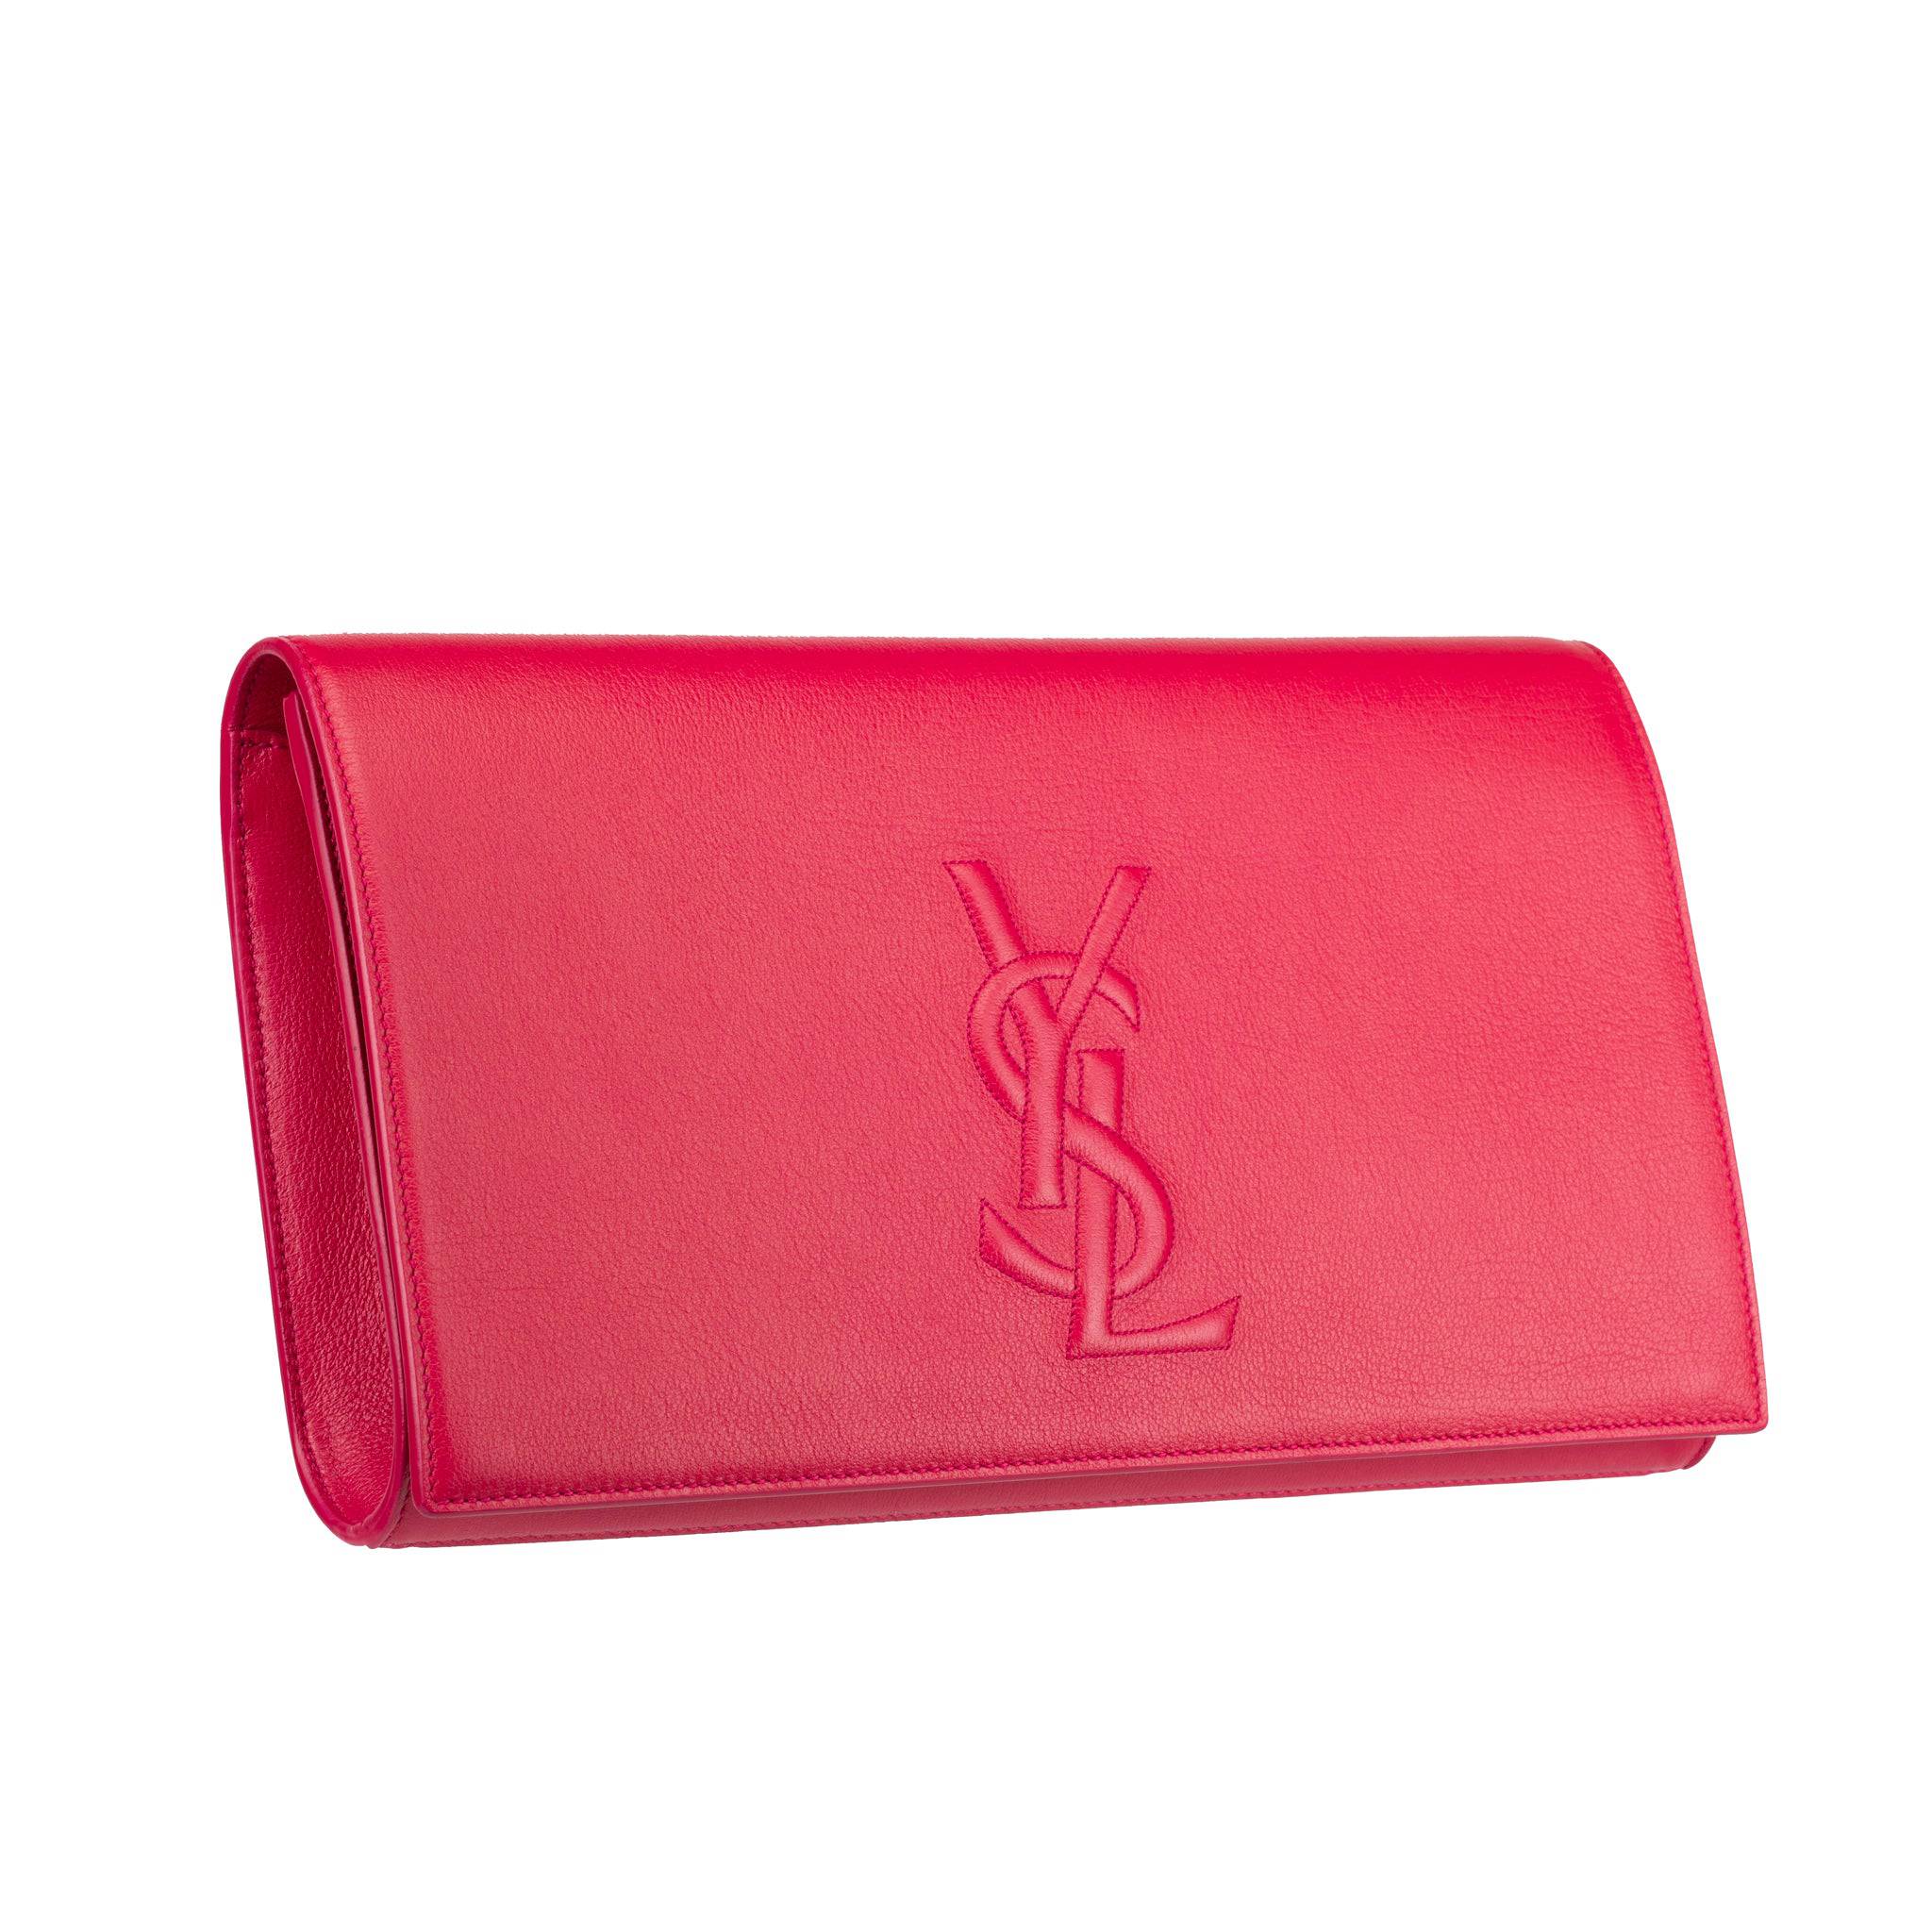 YVES SAINT LAURENT PINK LEATHER CLUTCH - On Repeat